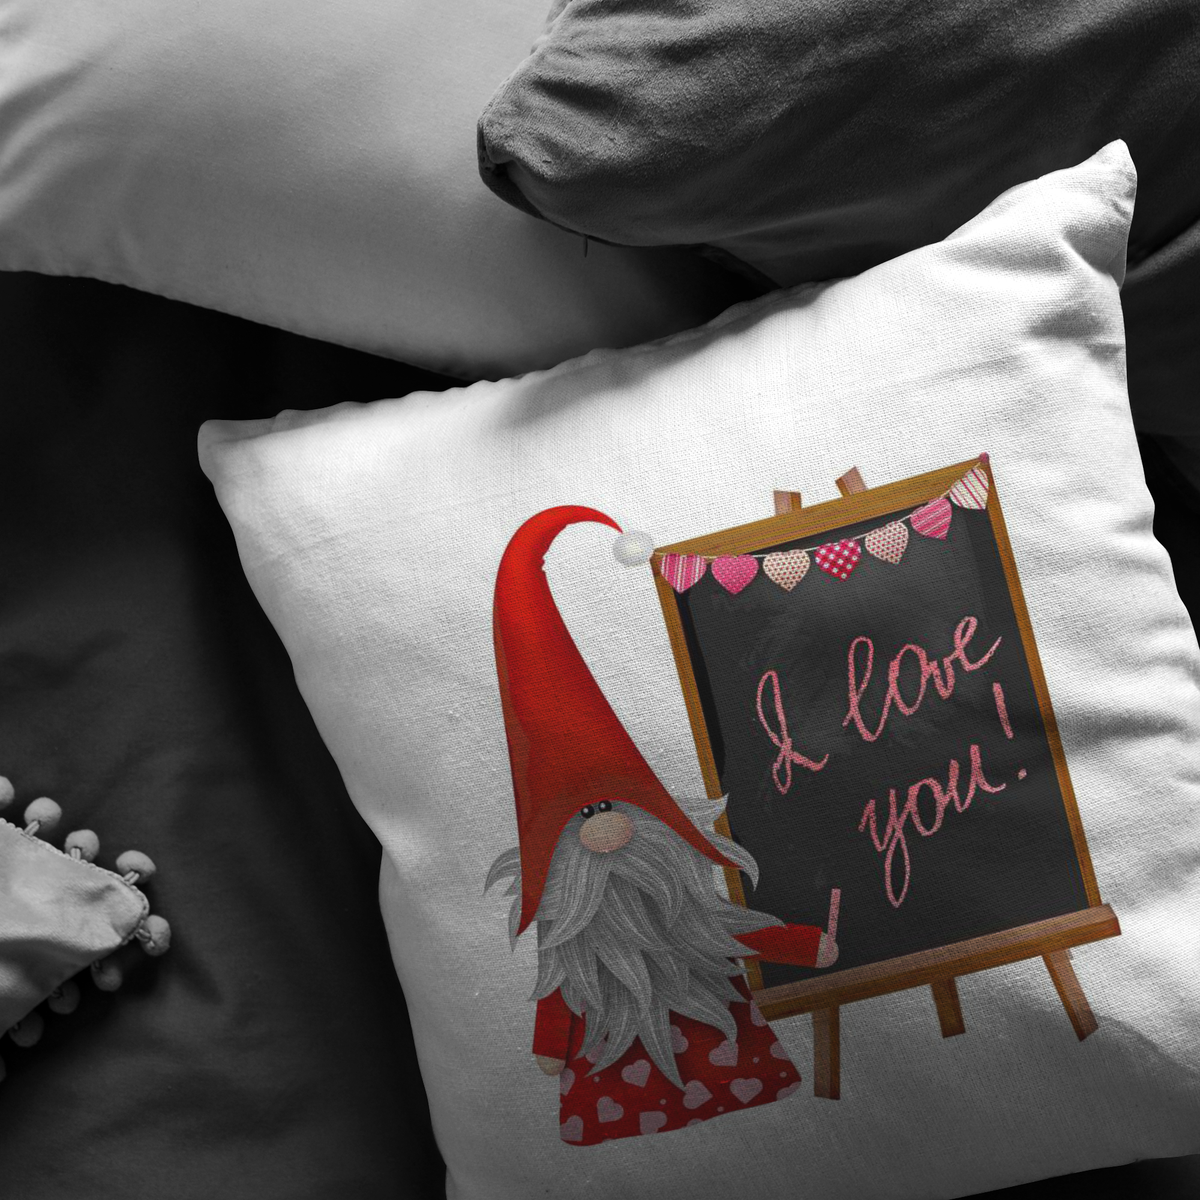 I Love You Gifts Gnome Throw Pillow